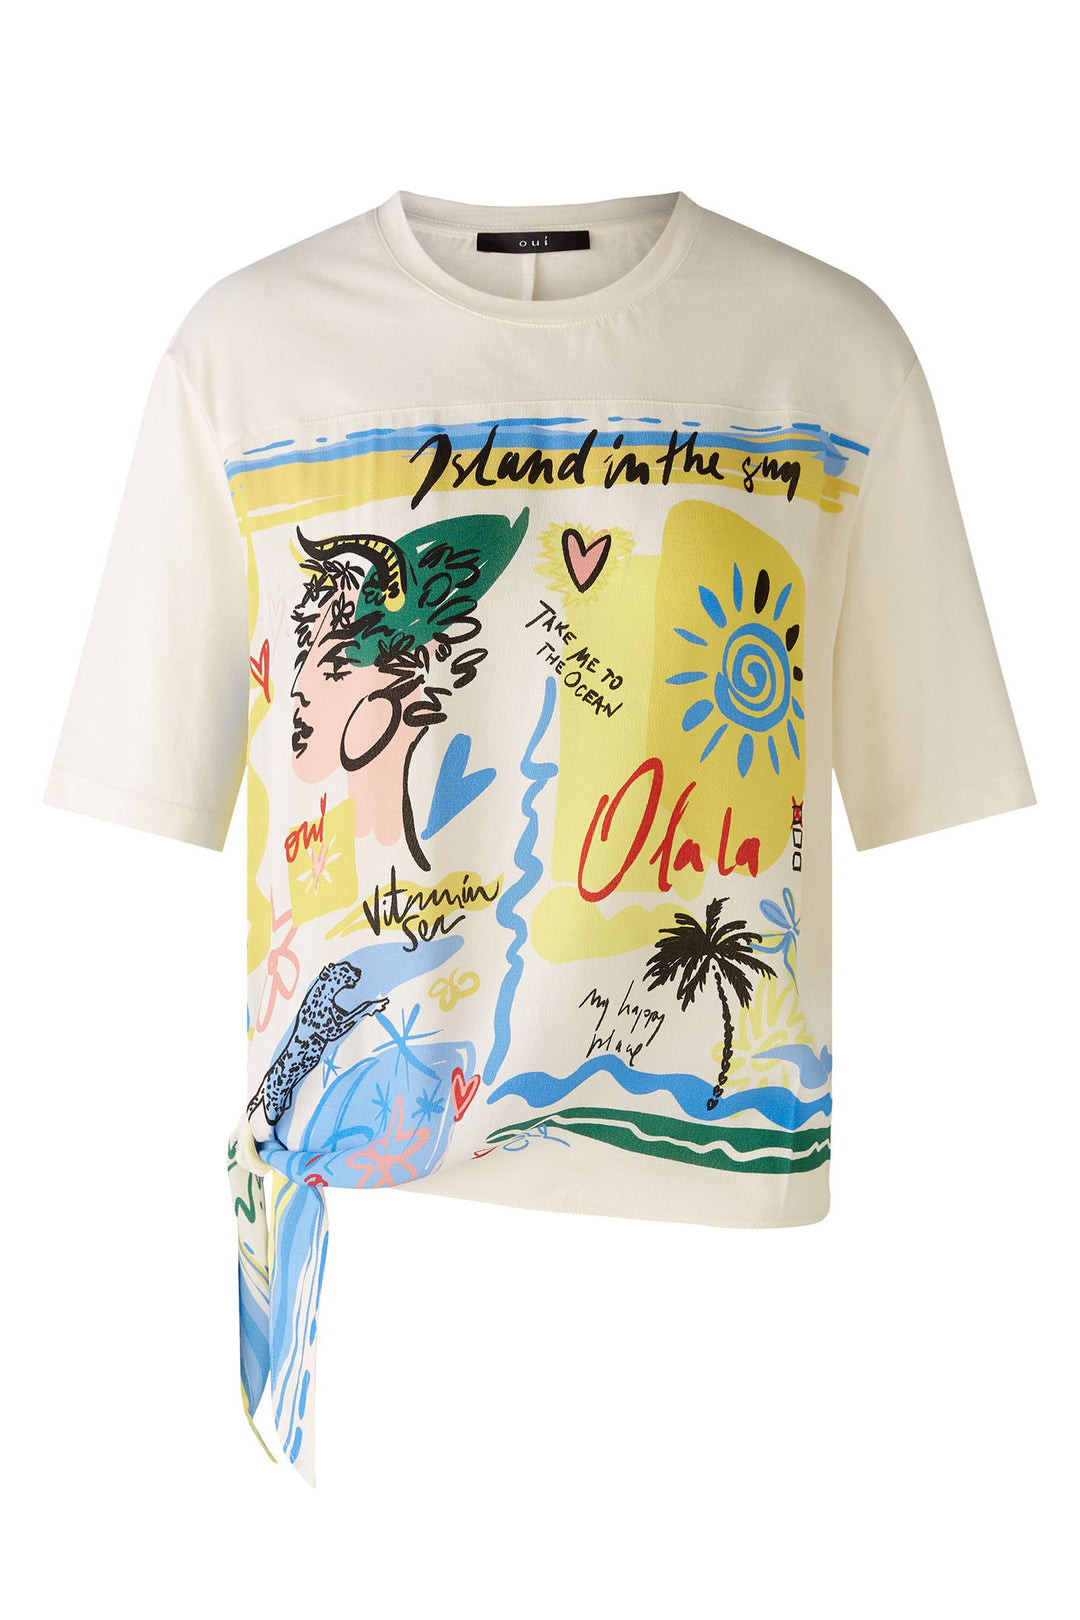 Oui 87506 White Cloud Dancer Summer Lover Print Knotted Top - Olivia Grace Fashion